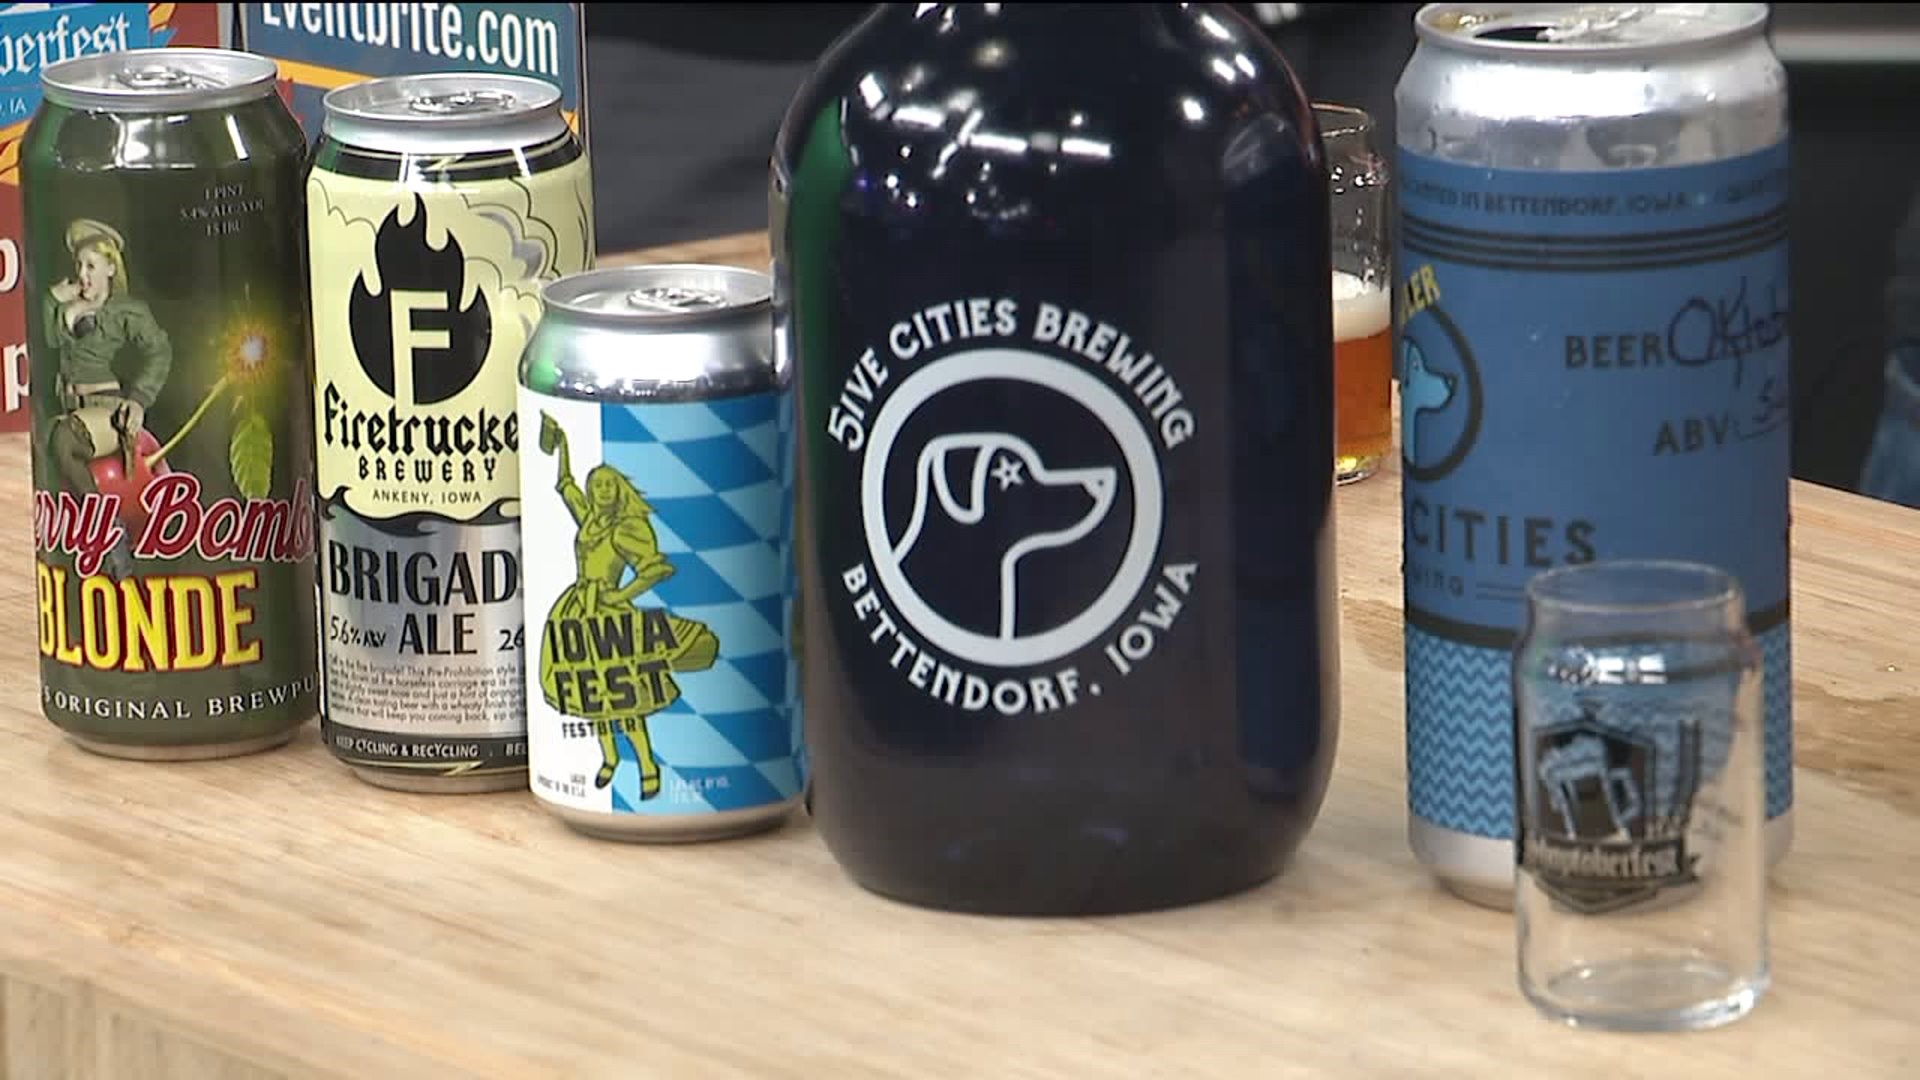 Drink Beer and Shop Until You Drop at Shoptoberfest in LeClaire